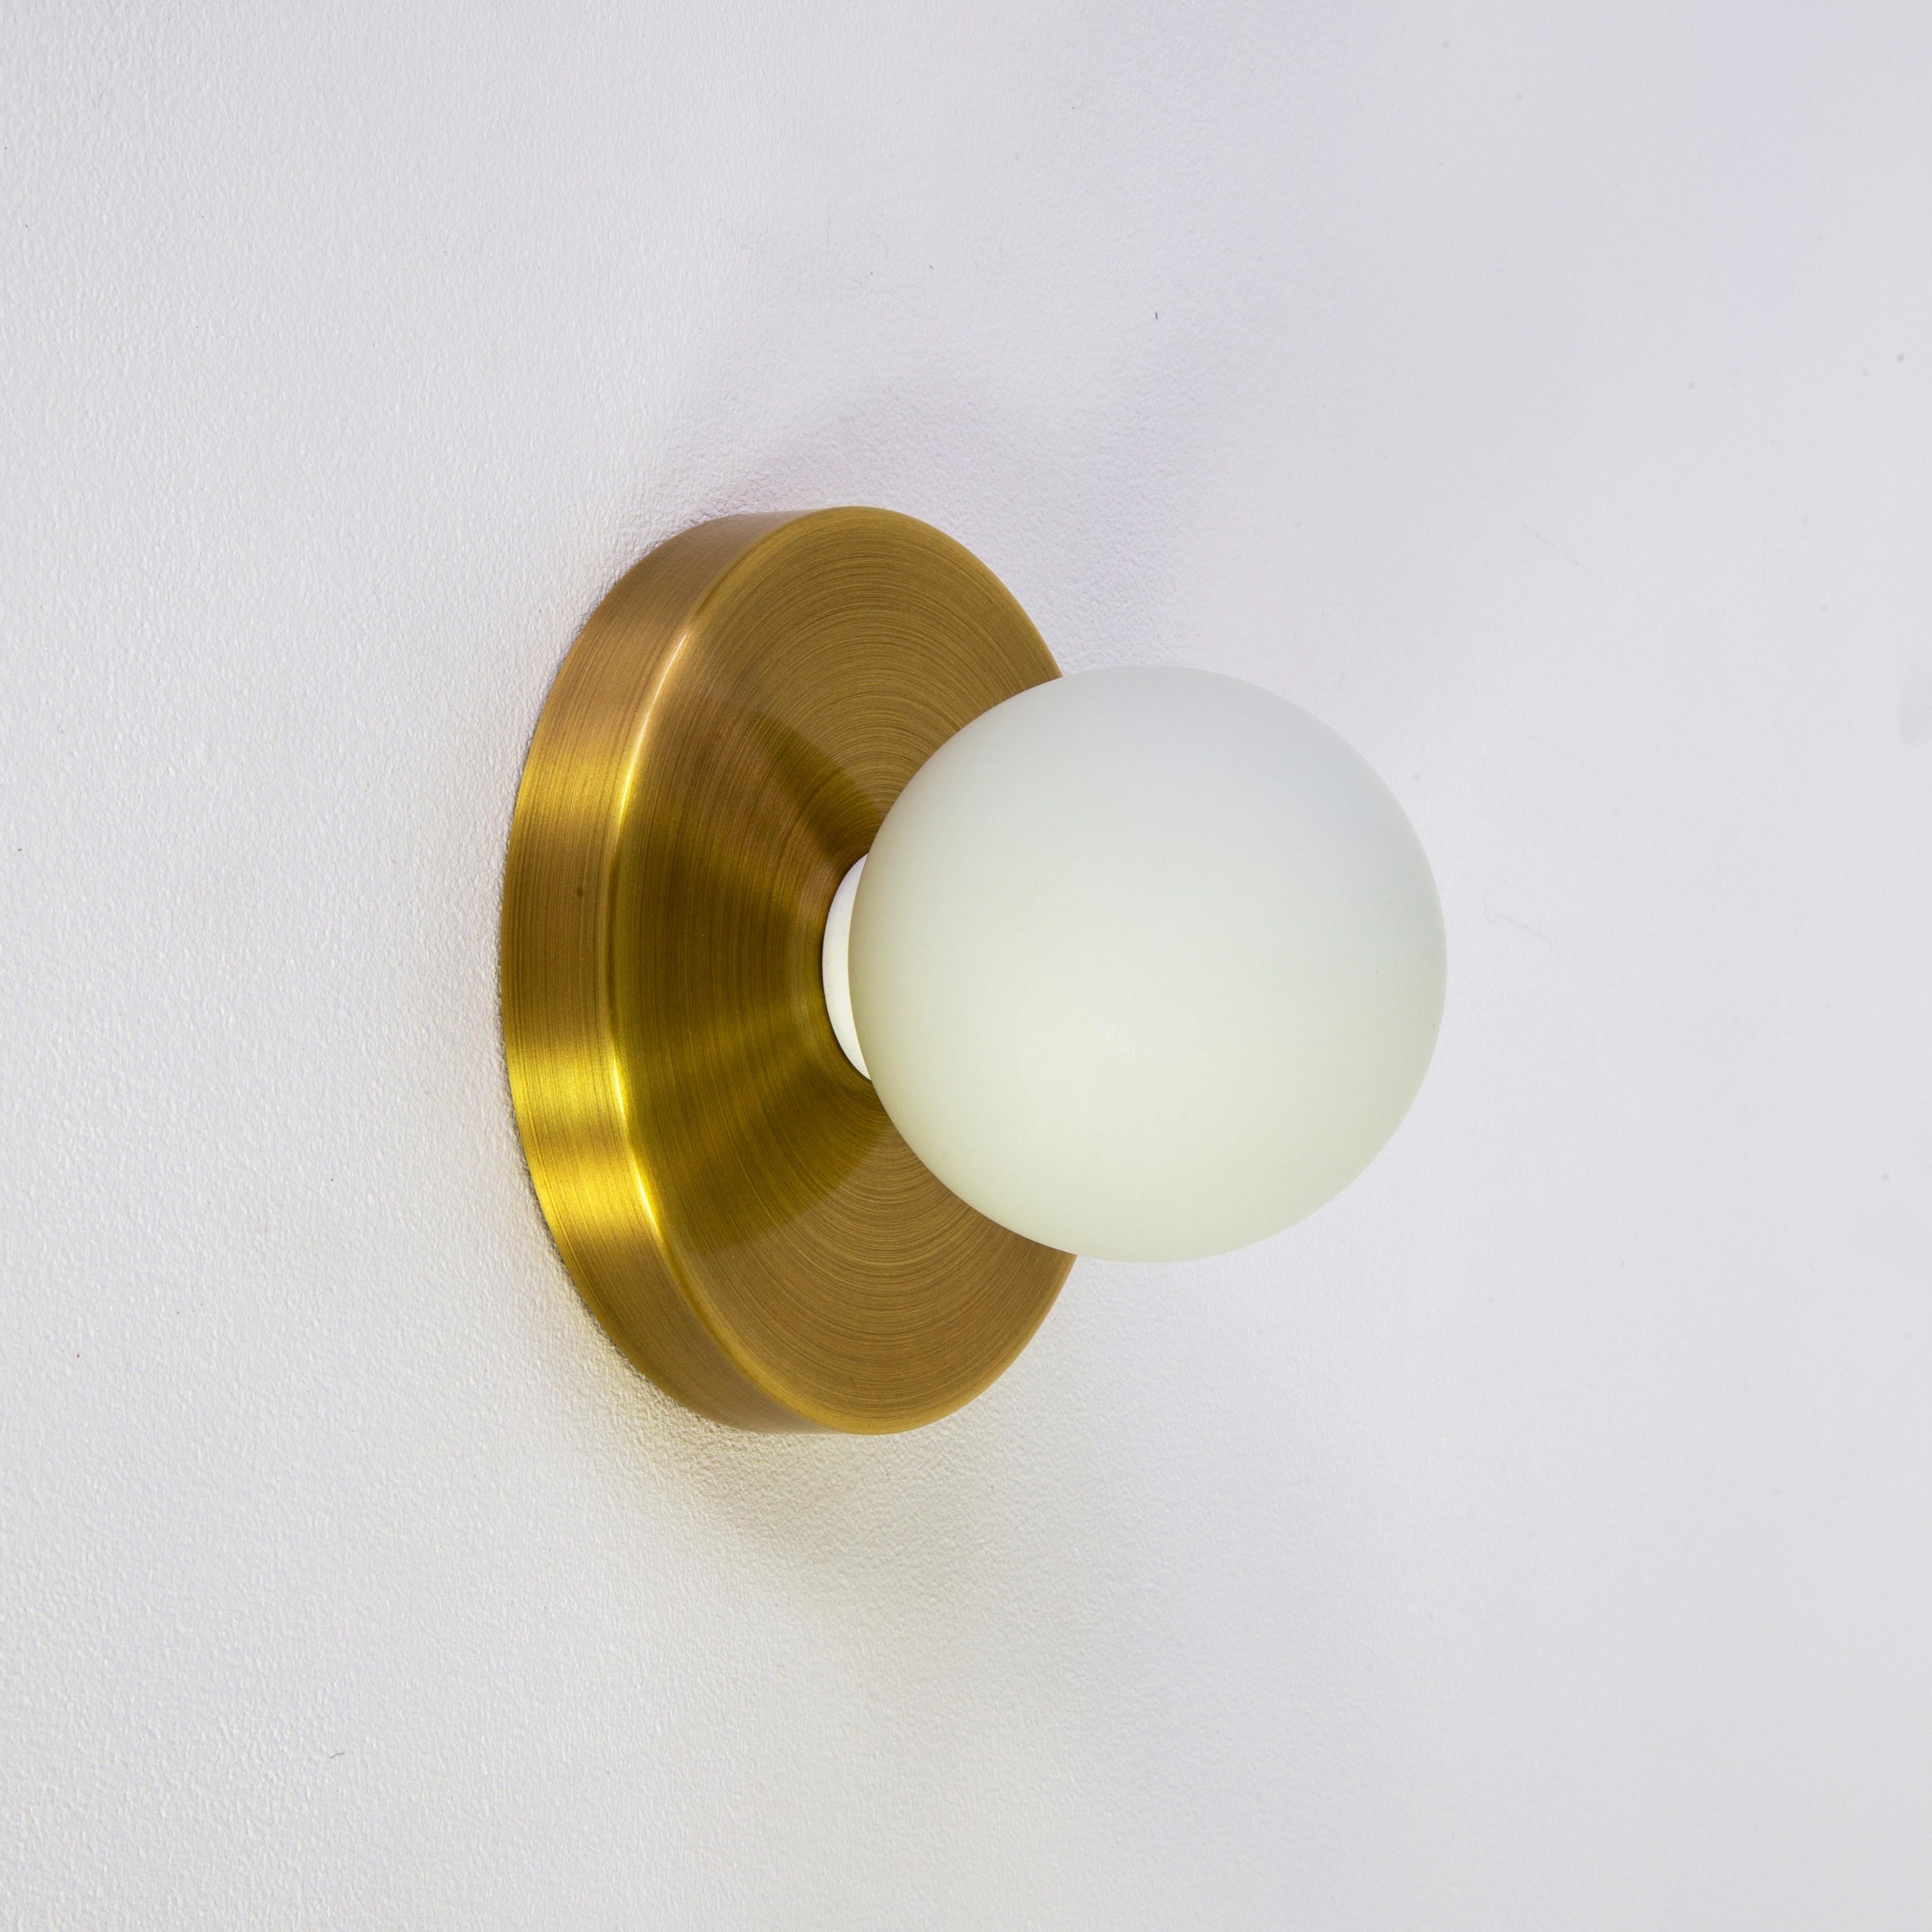 This listing is for 4x Globe Sconces in brushed brass designed and manufactured by Research.Lighting.

Materials: Brass, Steel & Glass
Finish: Brushed Brass
Electronics: 1x G9 Socket, 1x 4.5 Watt LED Bulb (included), 450 Lumens
ADA Compliant. UL